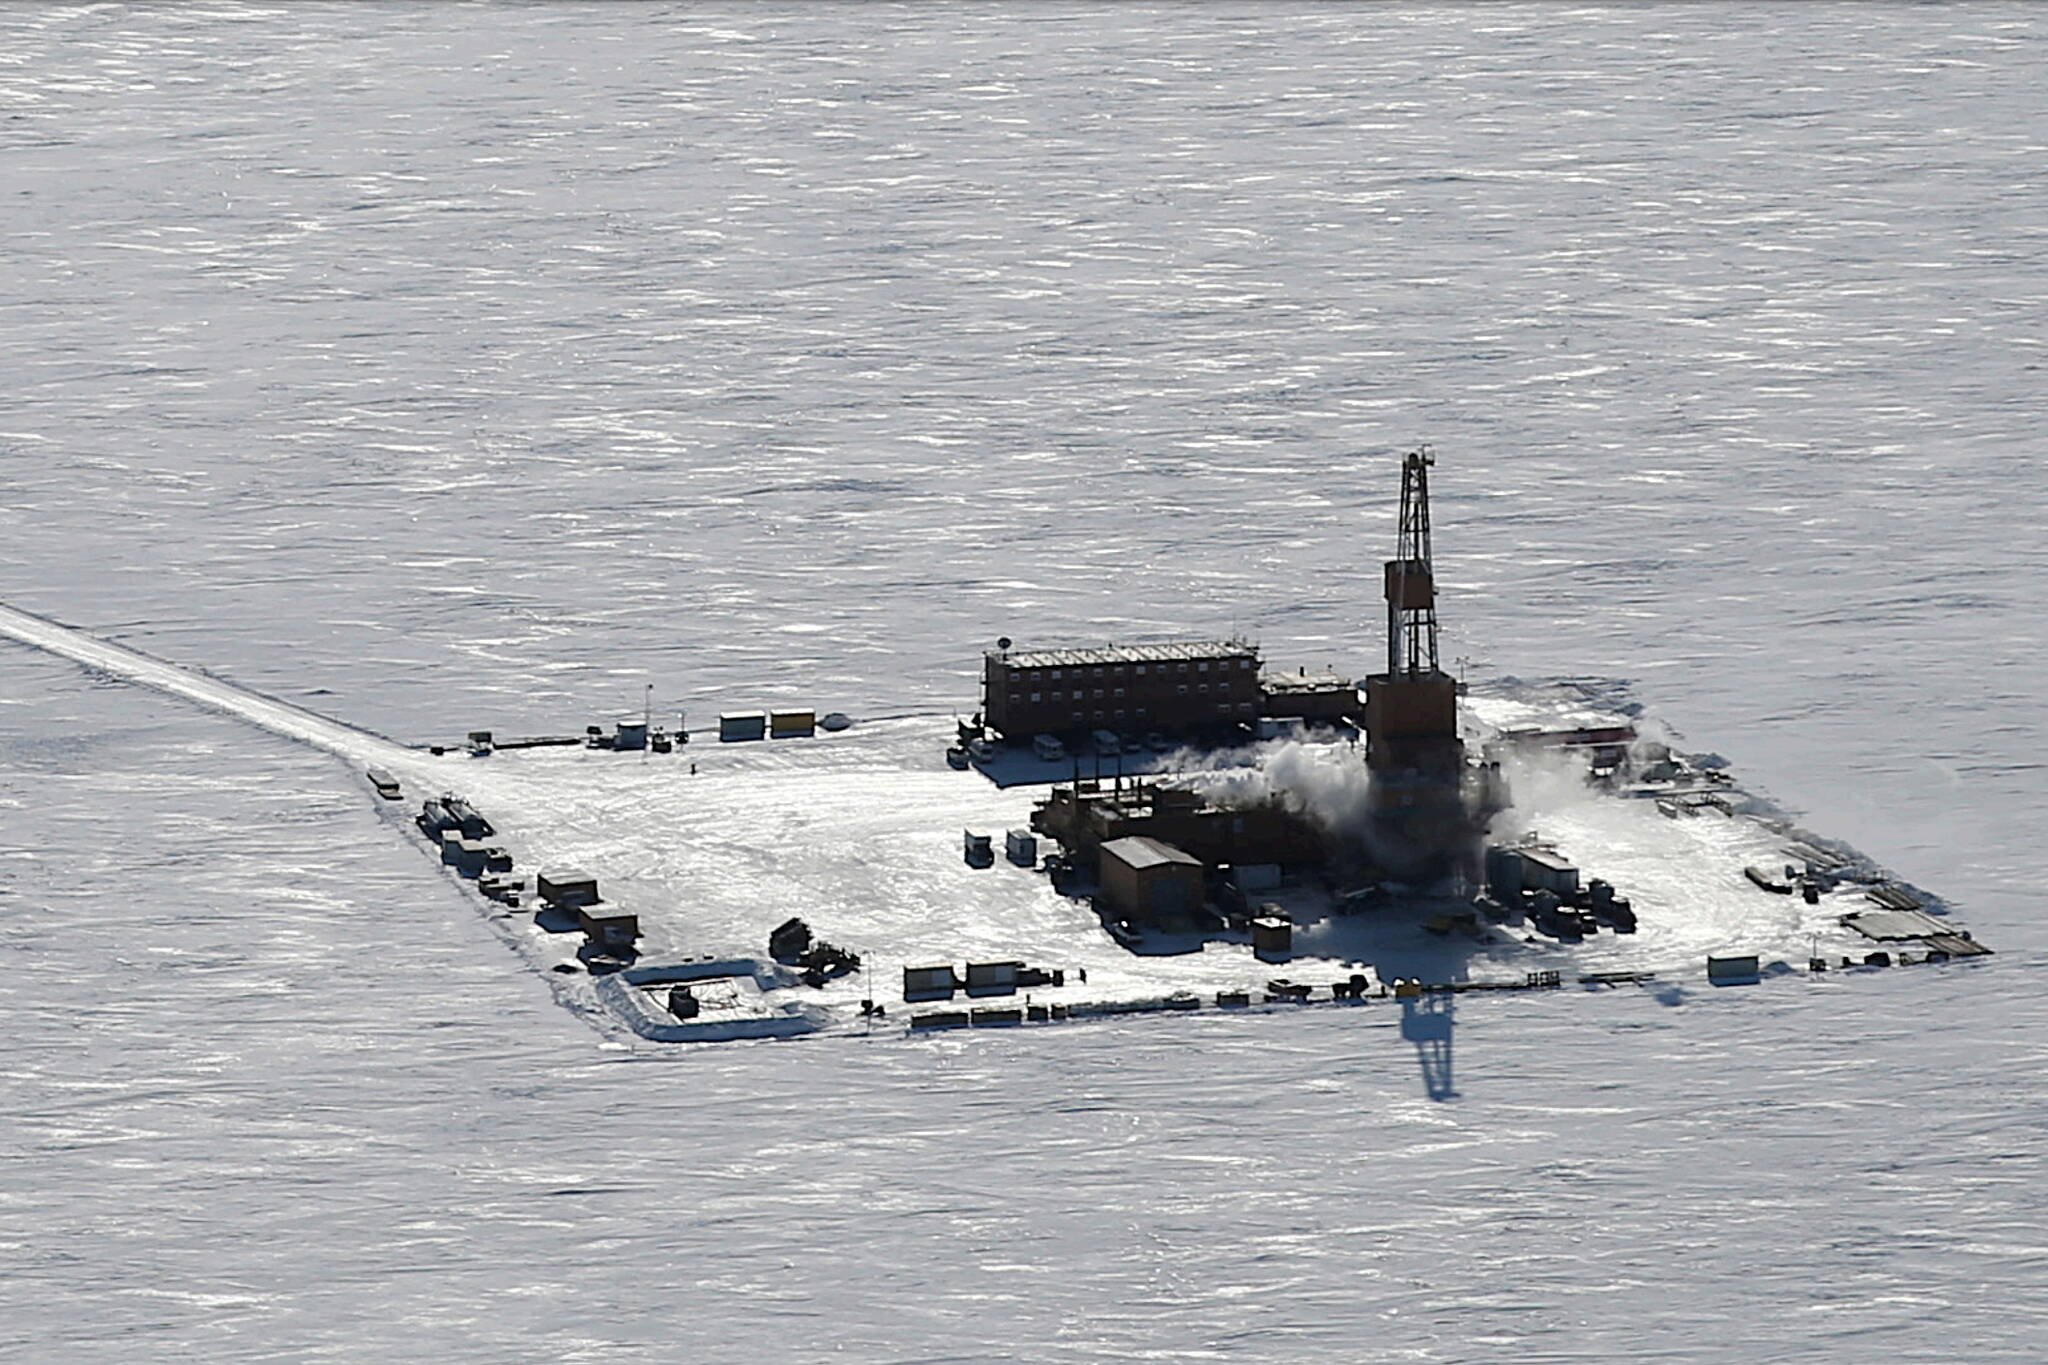 A ConocoPhillips oil rig operating during winter on Alaska’s North Slope is featured on the cover of the U.S. Bureau of Land Management’s report recommending approval of the Willow oil project ConocoPhillips is seeking to develop. The Alaska State House on Monday approved a resolution asking the Biden administration to give final approval to a project allowing three drilling pads with the possibility of a fourth (compared to the five pads the oil company originally sought), as recommended by the BLM. (U.S. Bureau of Land Management)